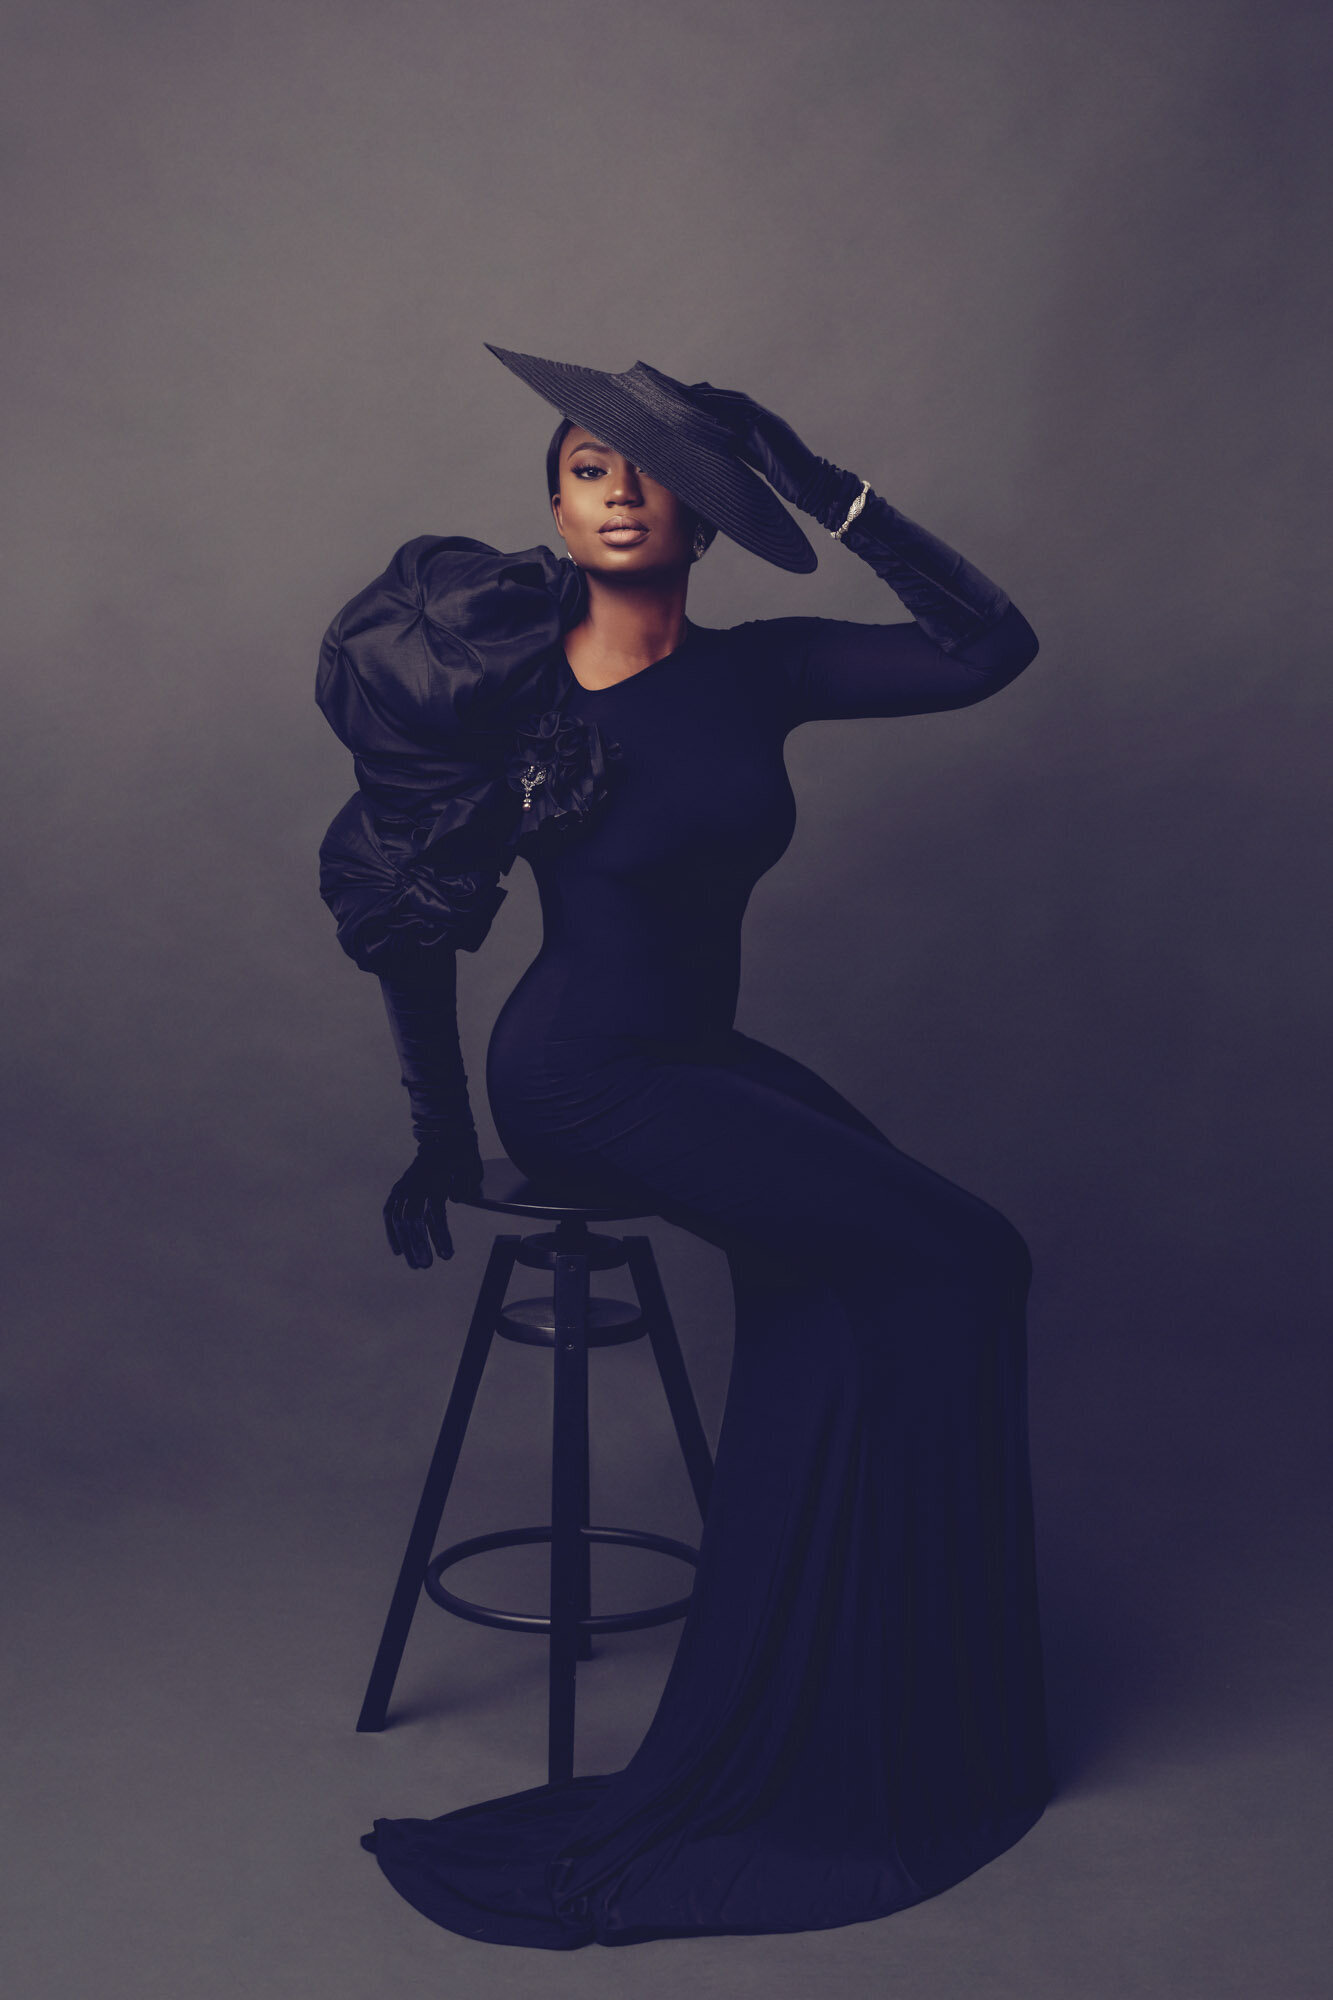 Luxury portrait of a woman in a black gown, sitting on a black stool, looking camera center. Houston, TX.